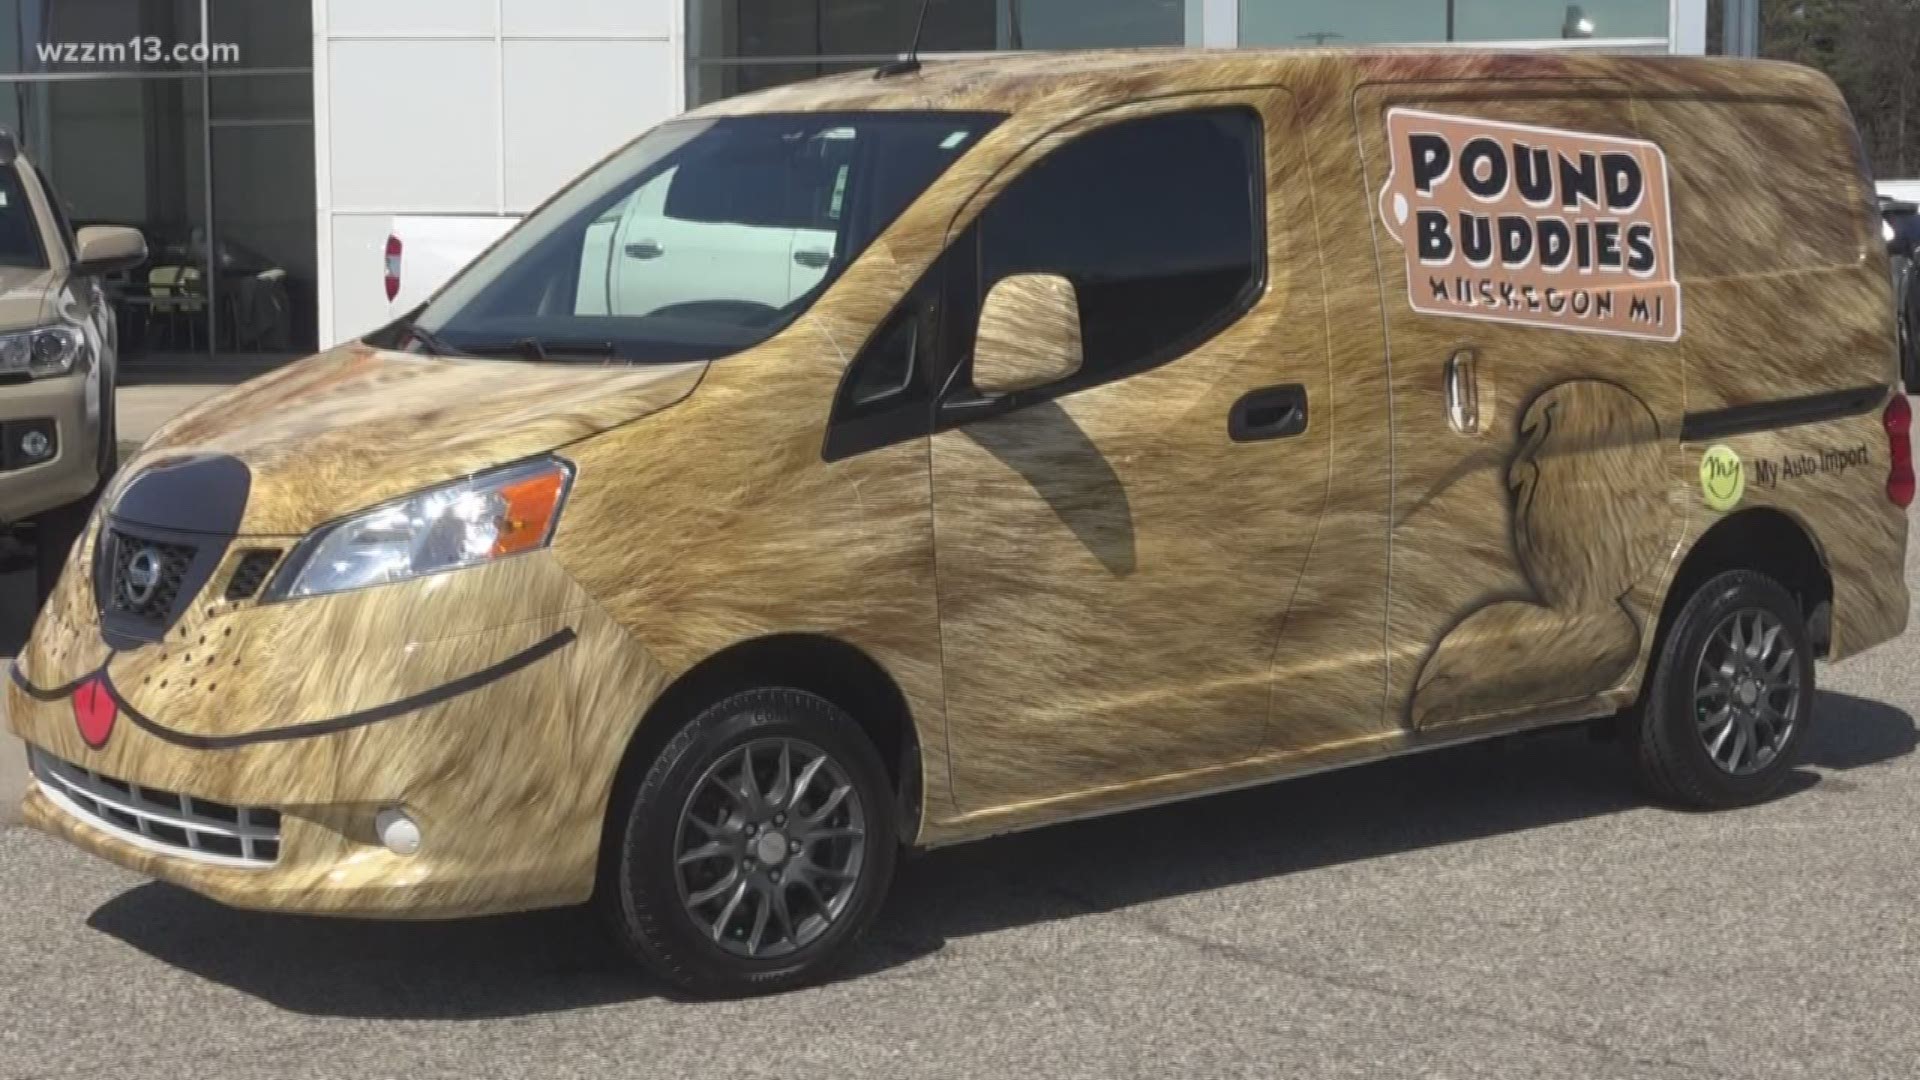 Pound Buddies is gifted a new van